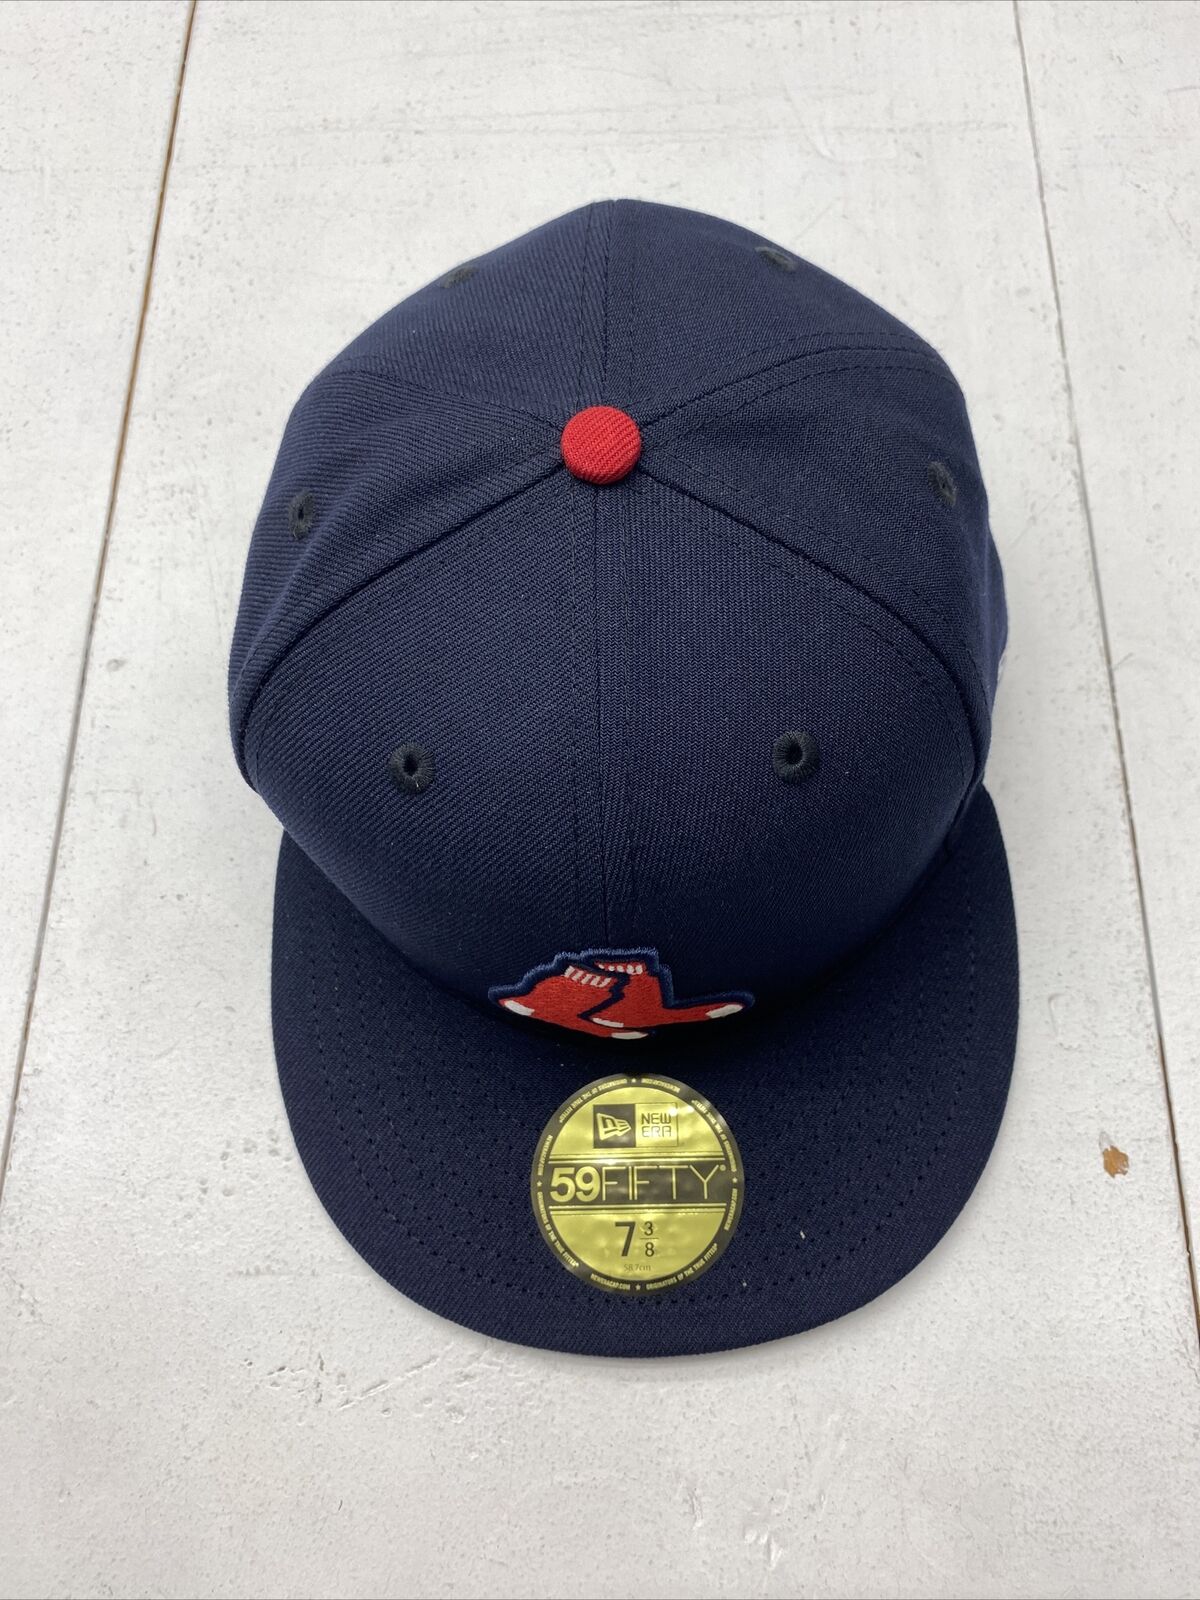 Exclusive Fitted New Era 7 3/4 Boston Red Sox Hat Cap Sea Blue